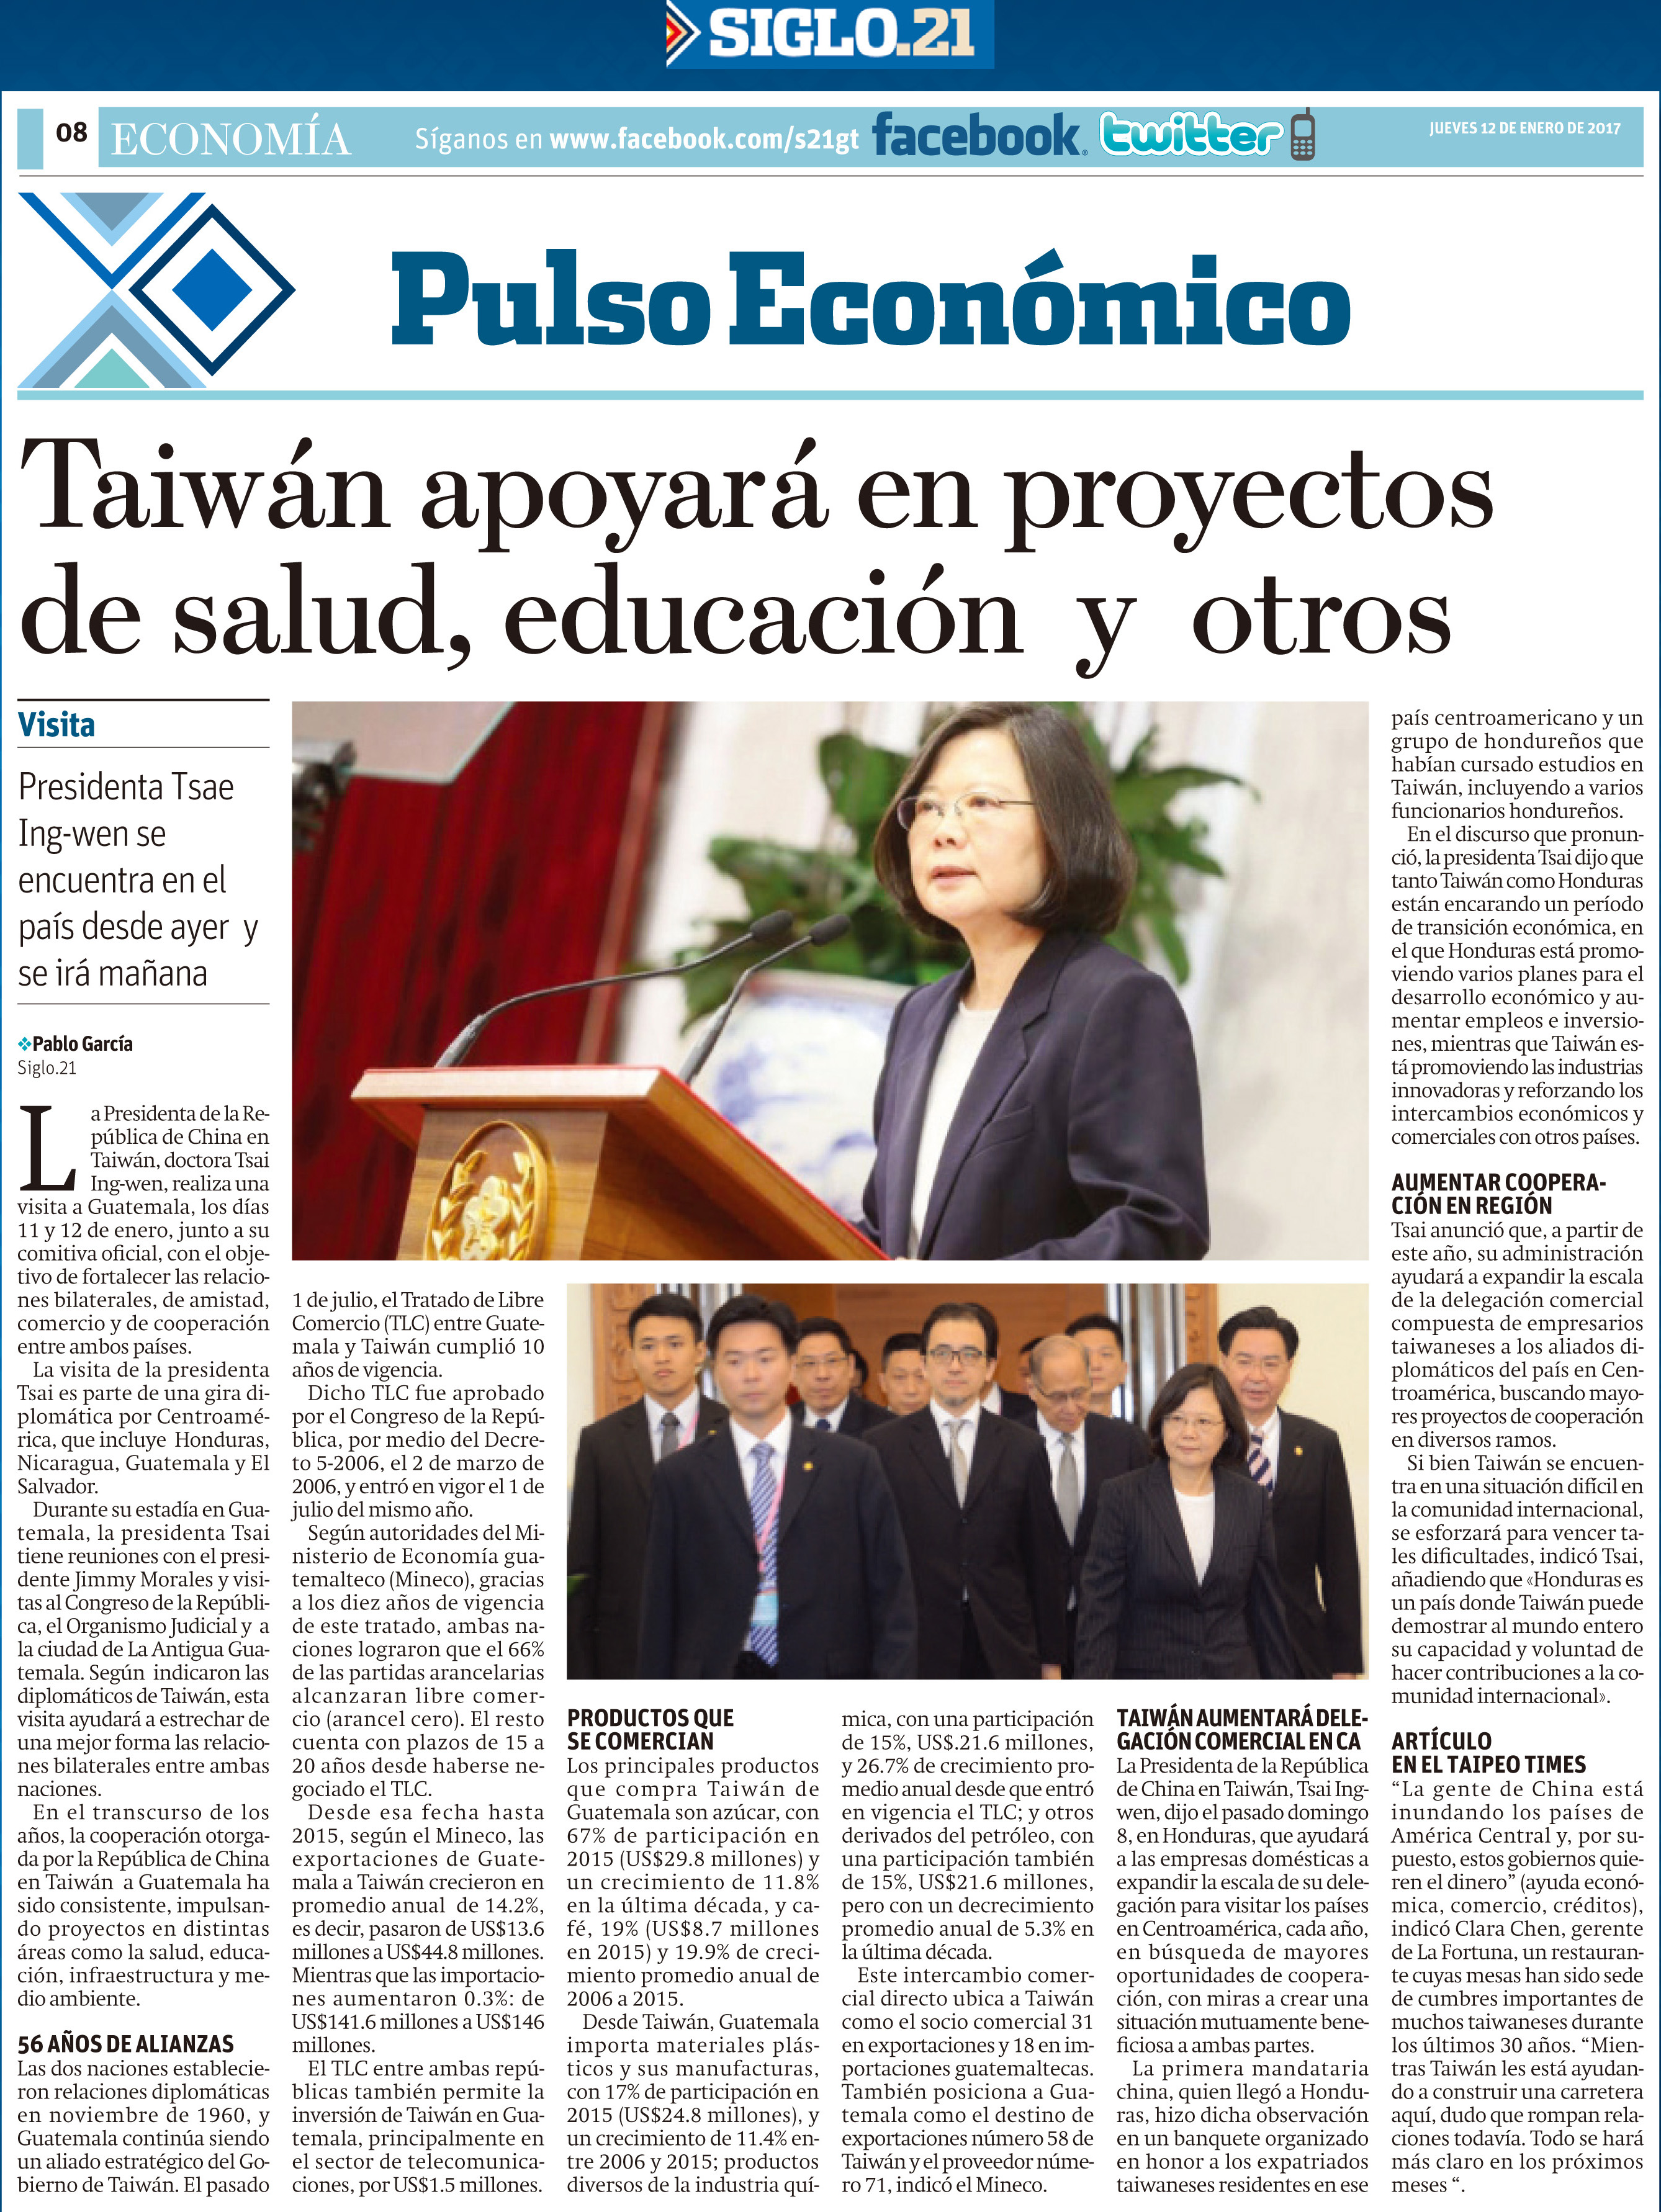 Taiwan to support health, education, and other projects in Guatemala